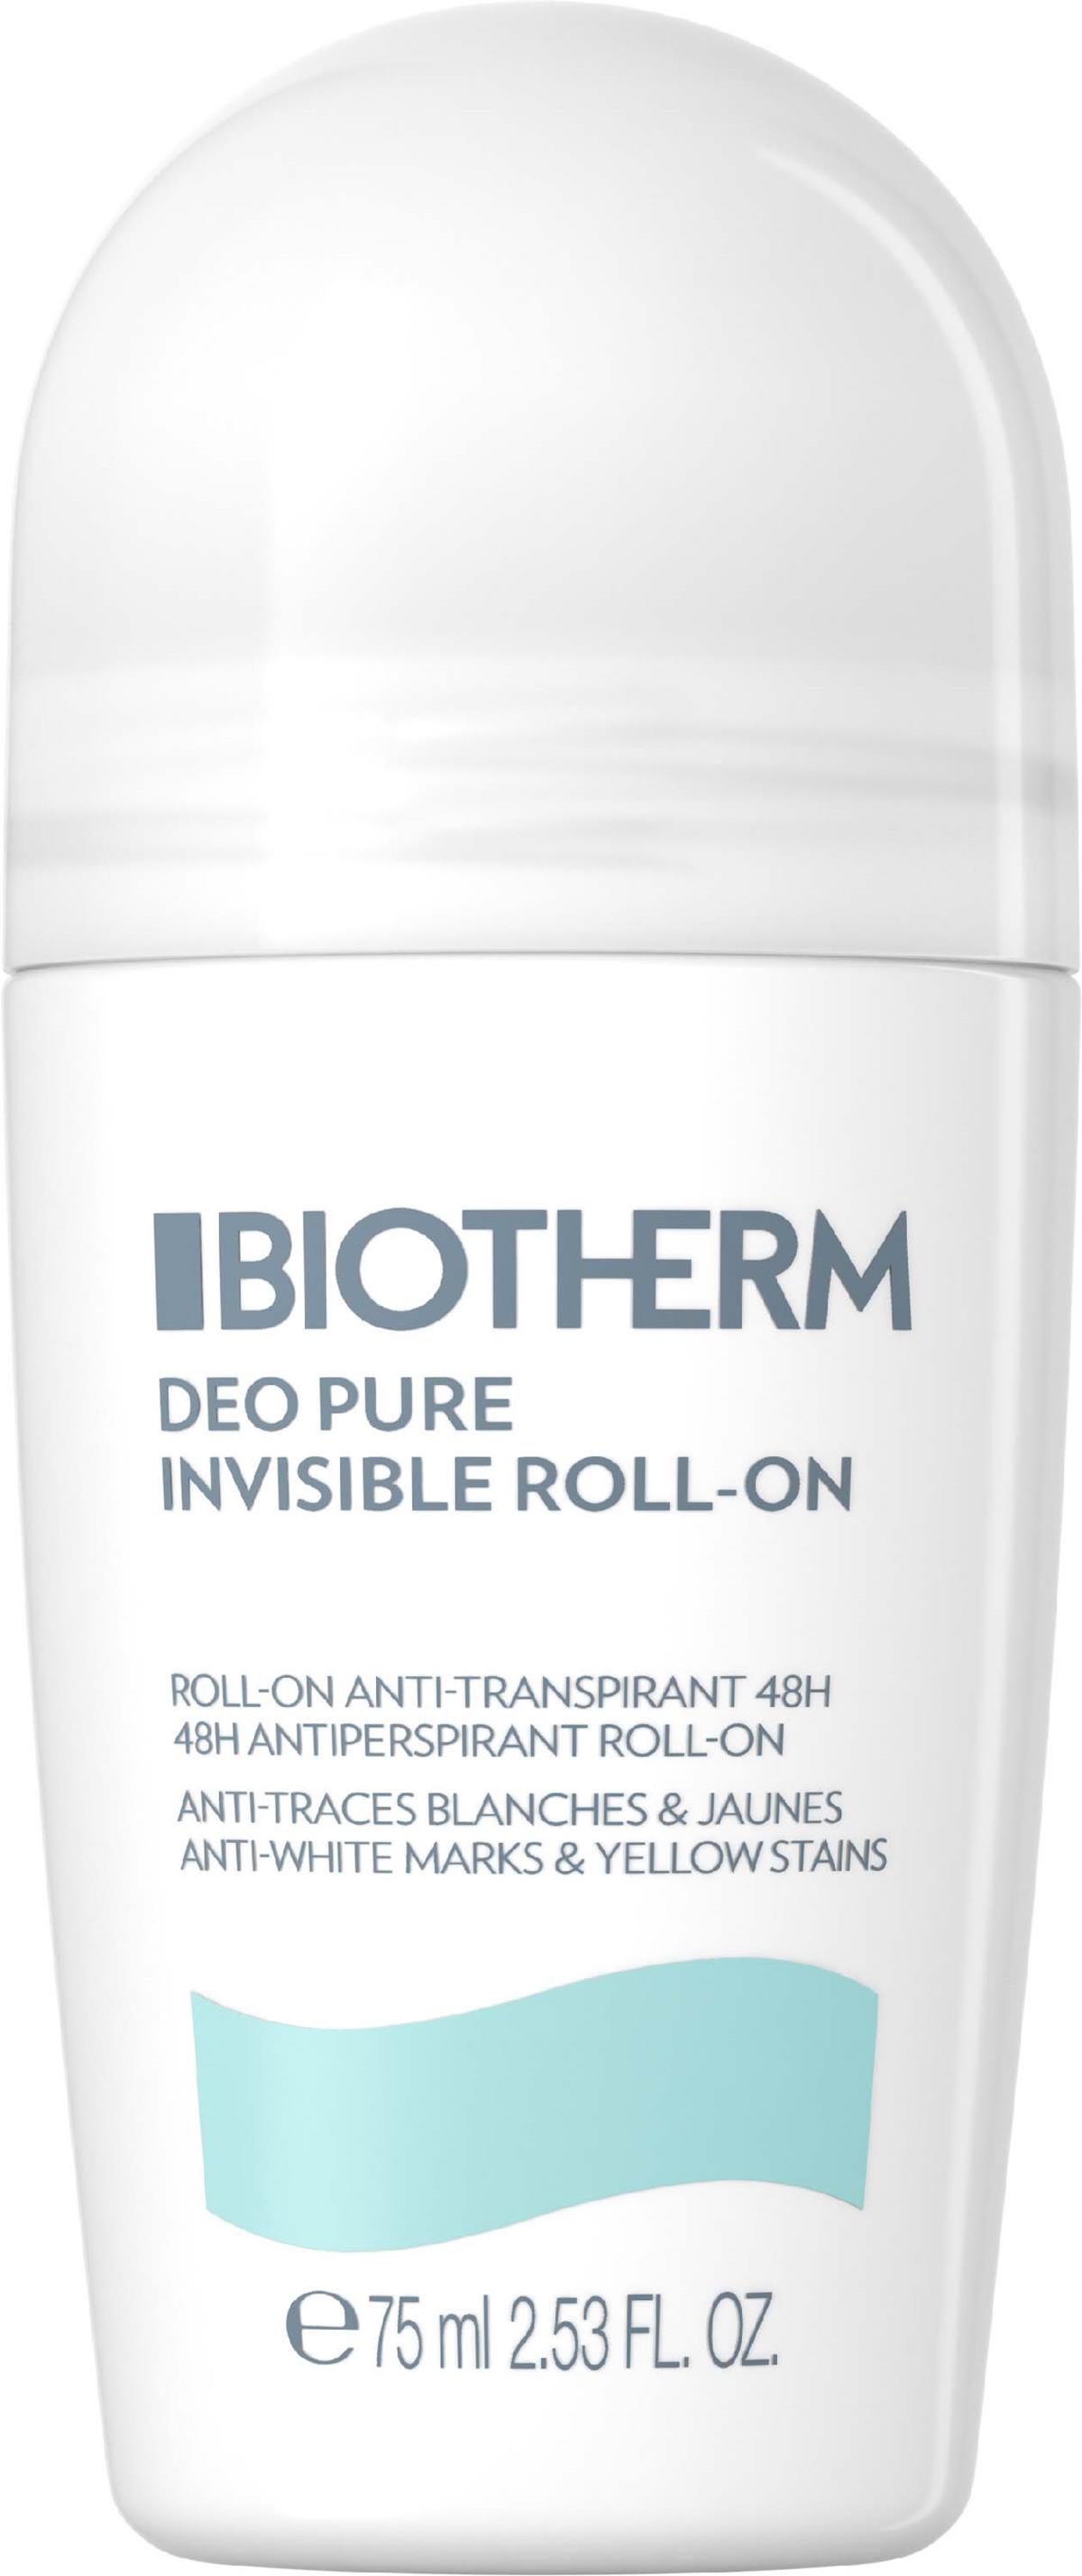 Obedient next Brass Biotherm Deo Pure Invisible Roll- On 75 ml | lyko.com